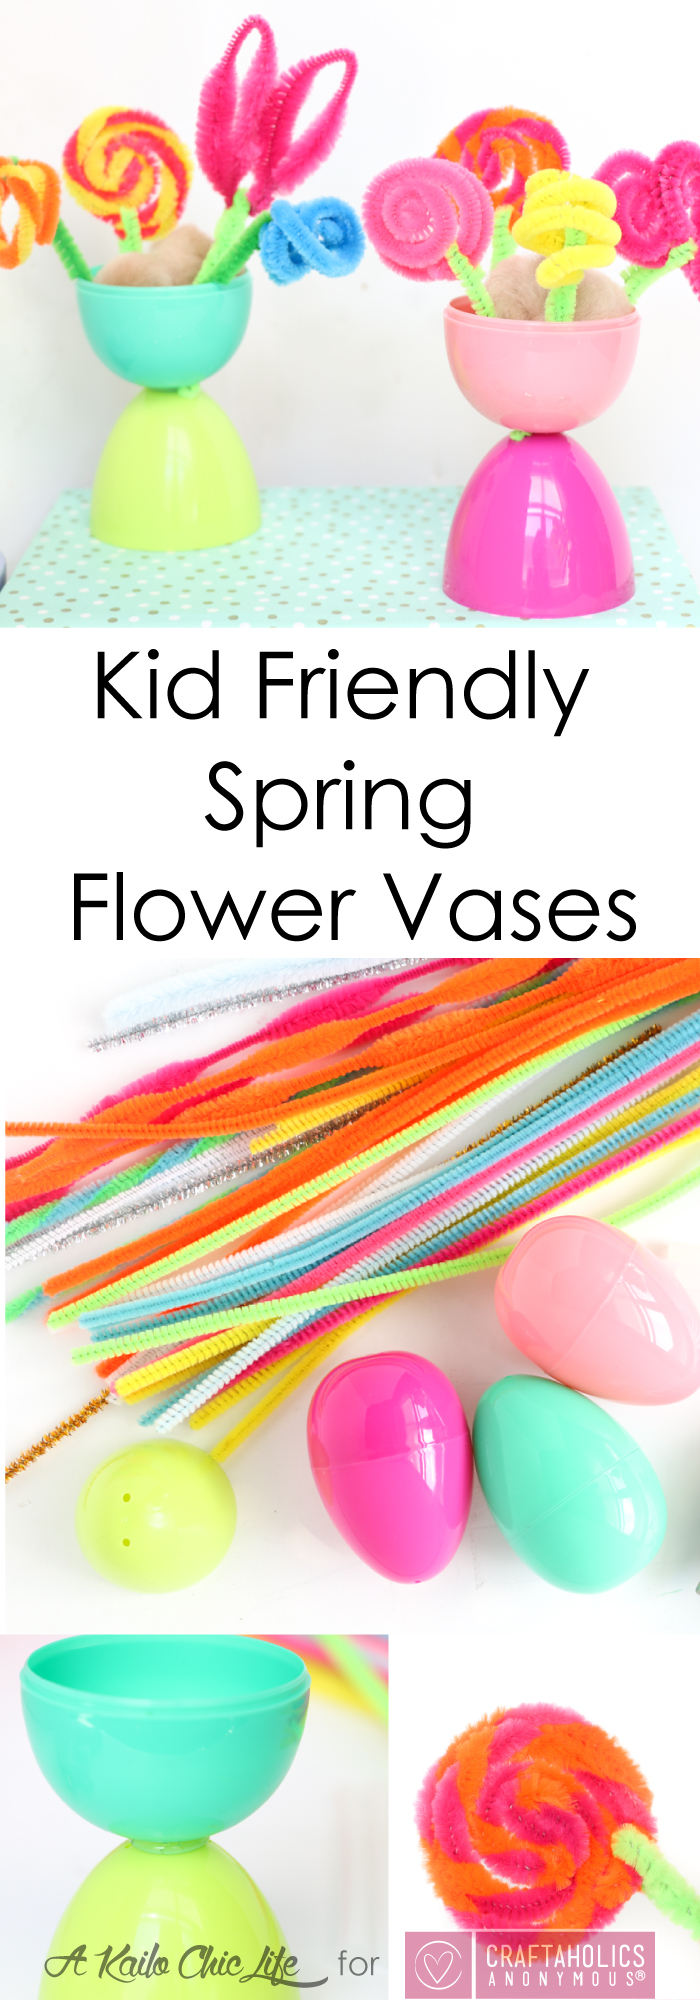 Kid Friendly Spring Flower Vases - Use Plastic Easter Eggs and Pipe Cleaners to create the fun, colorful kid craft flower vases